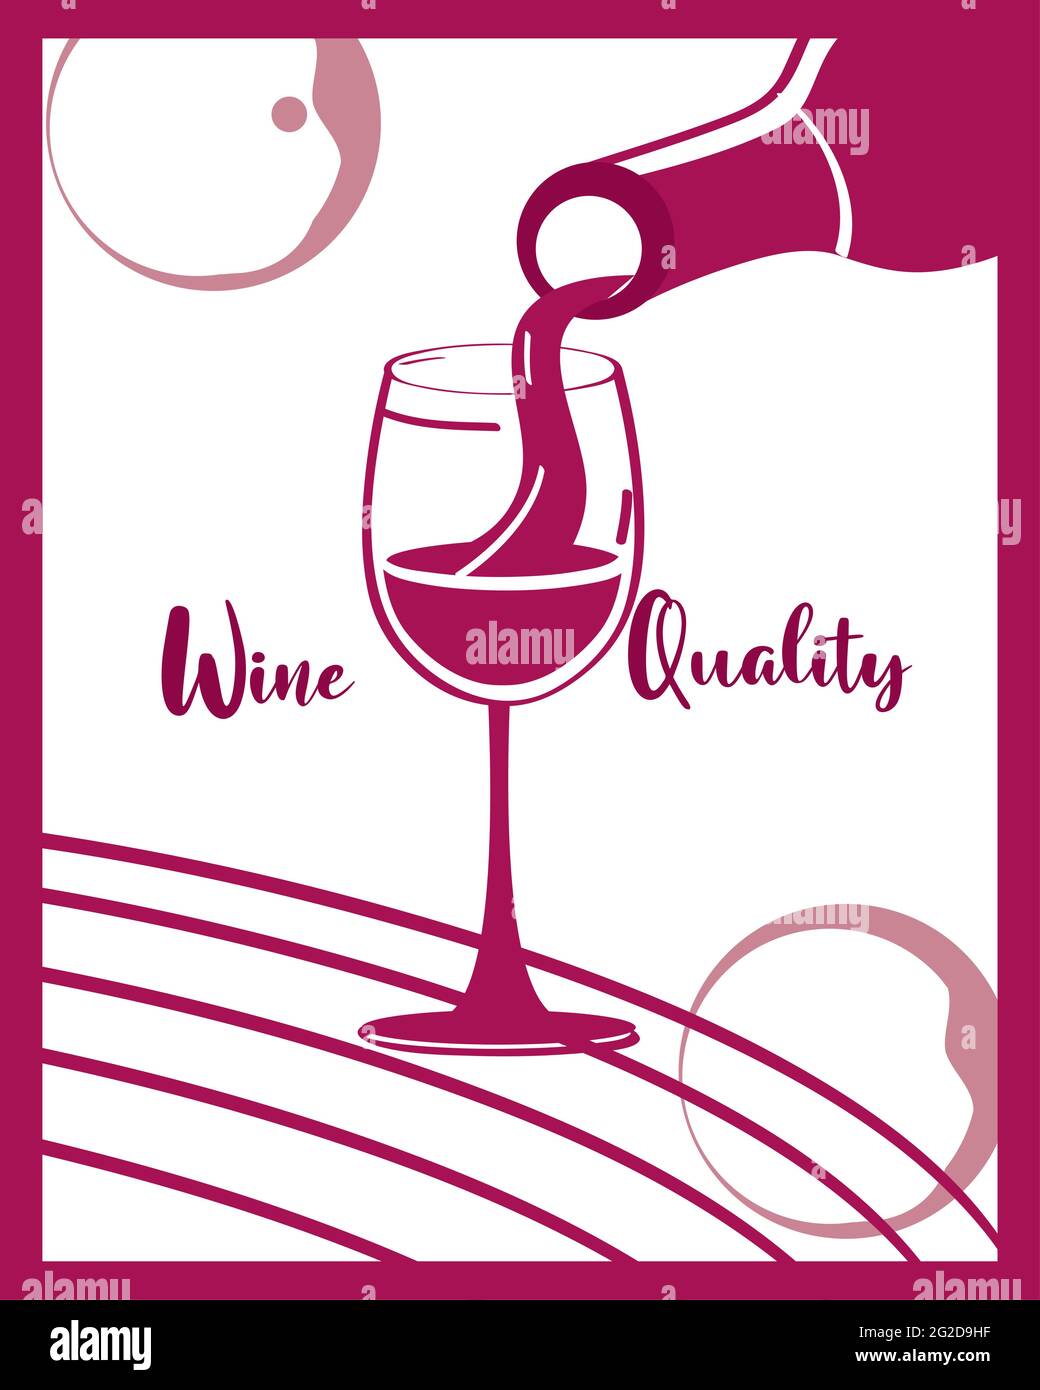 wine quality banner Stock Vector